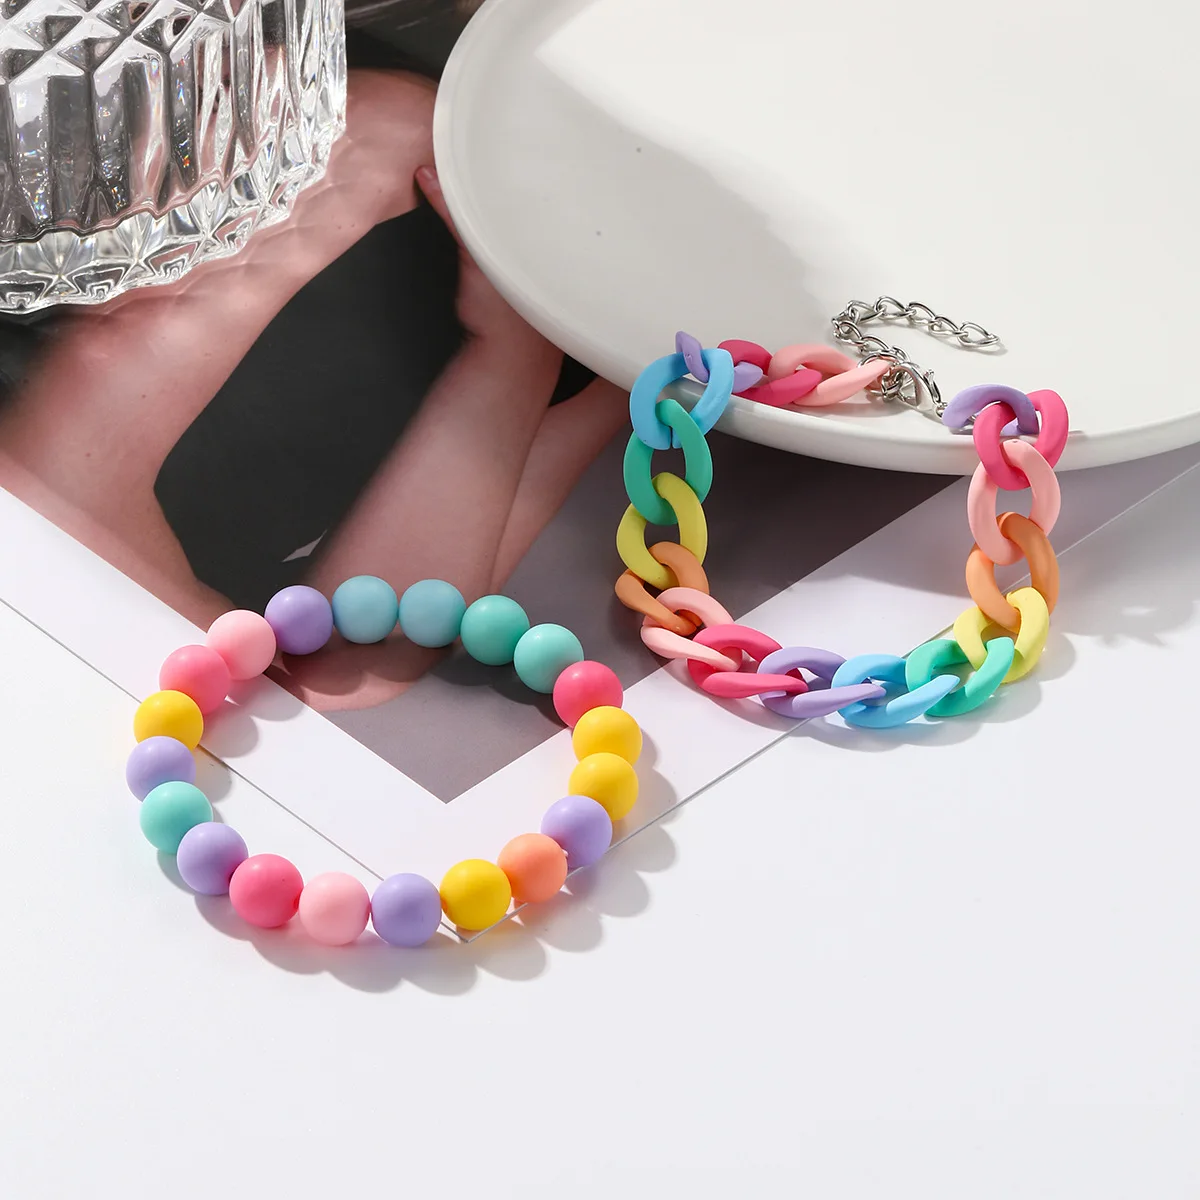 Wholesale Cheap Fashion Women Jewelry Cute Girls Colorful Rainbow Heart and Flower Charm Bead Bracelet For Kids